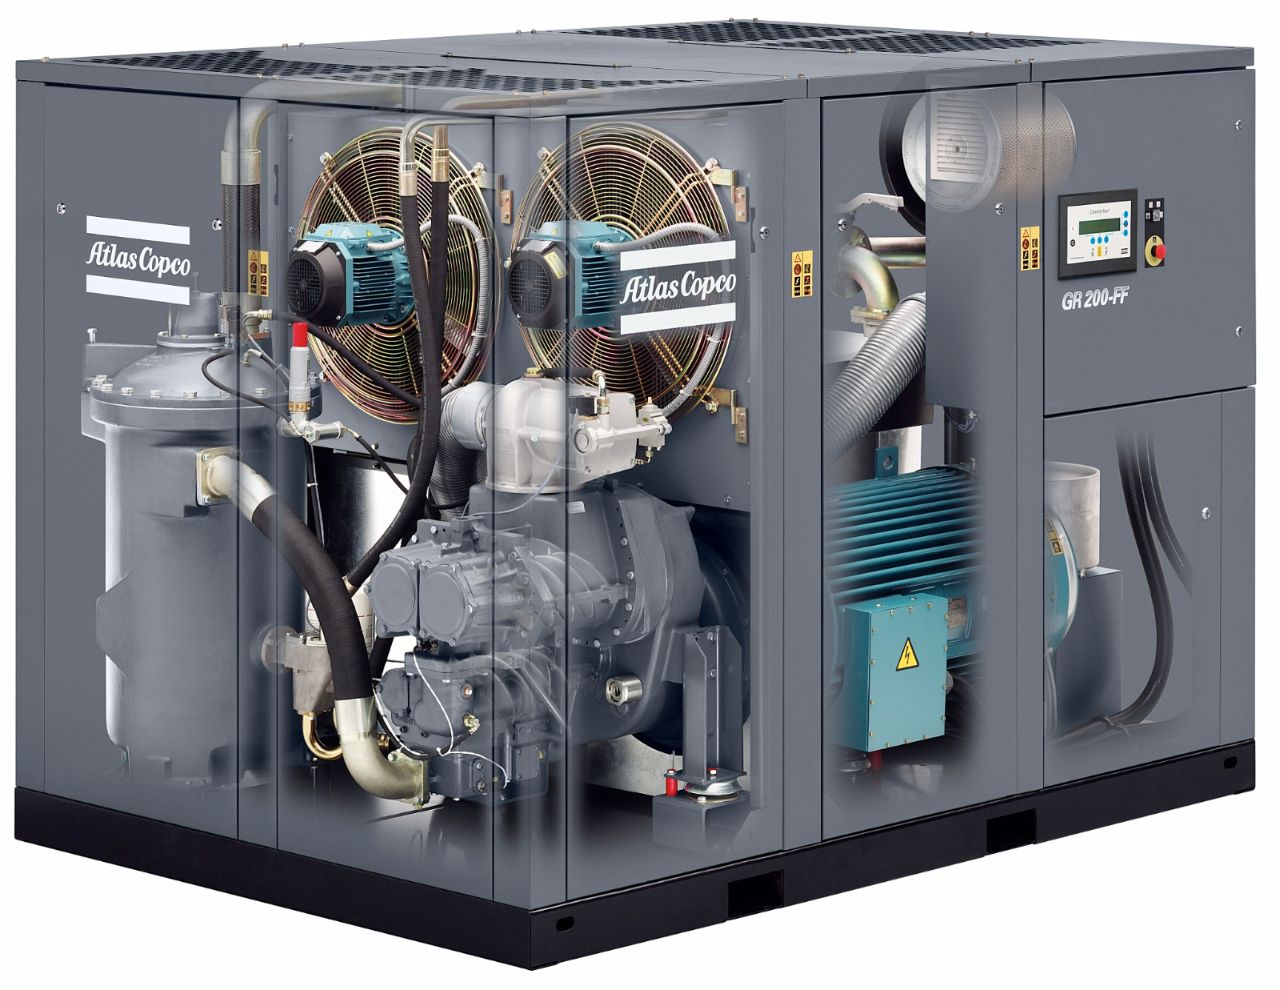 GR 110-200 oil-injected two-stage rotary screw compressor